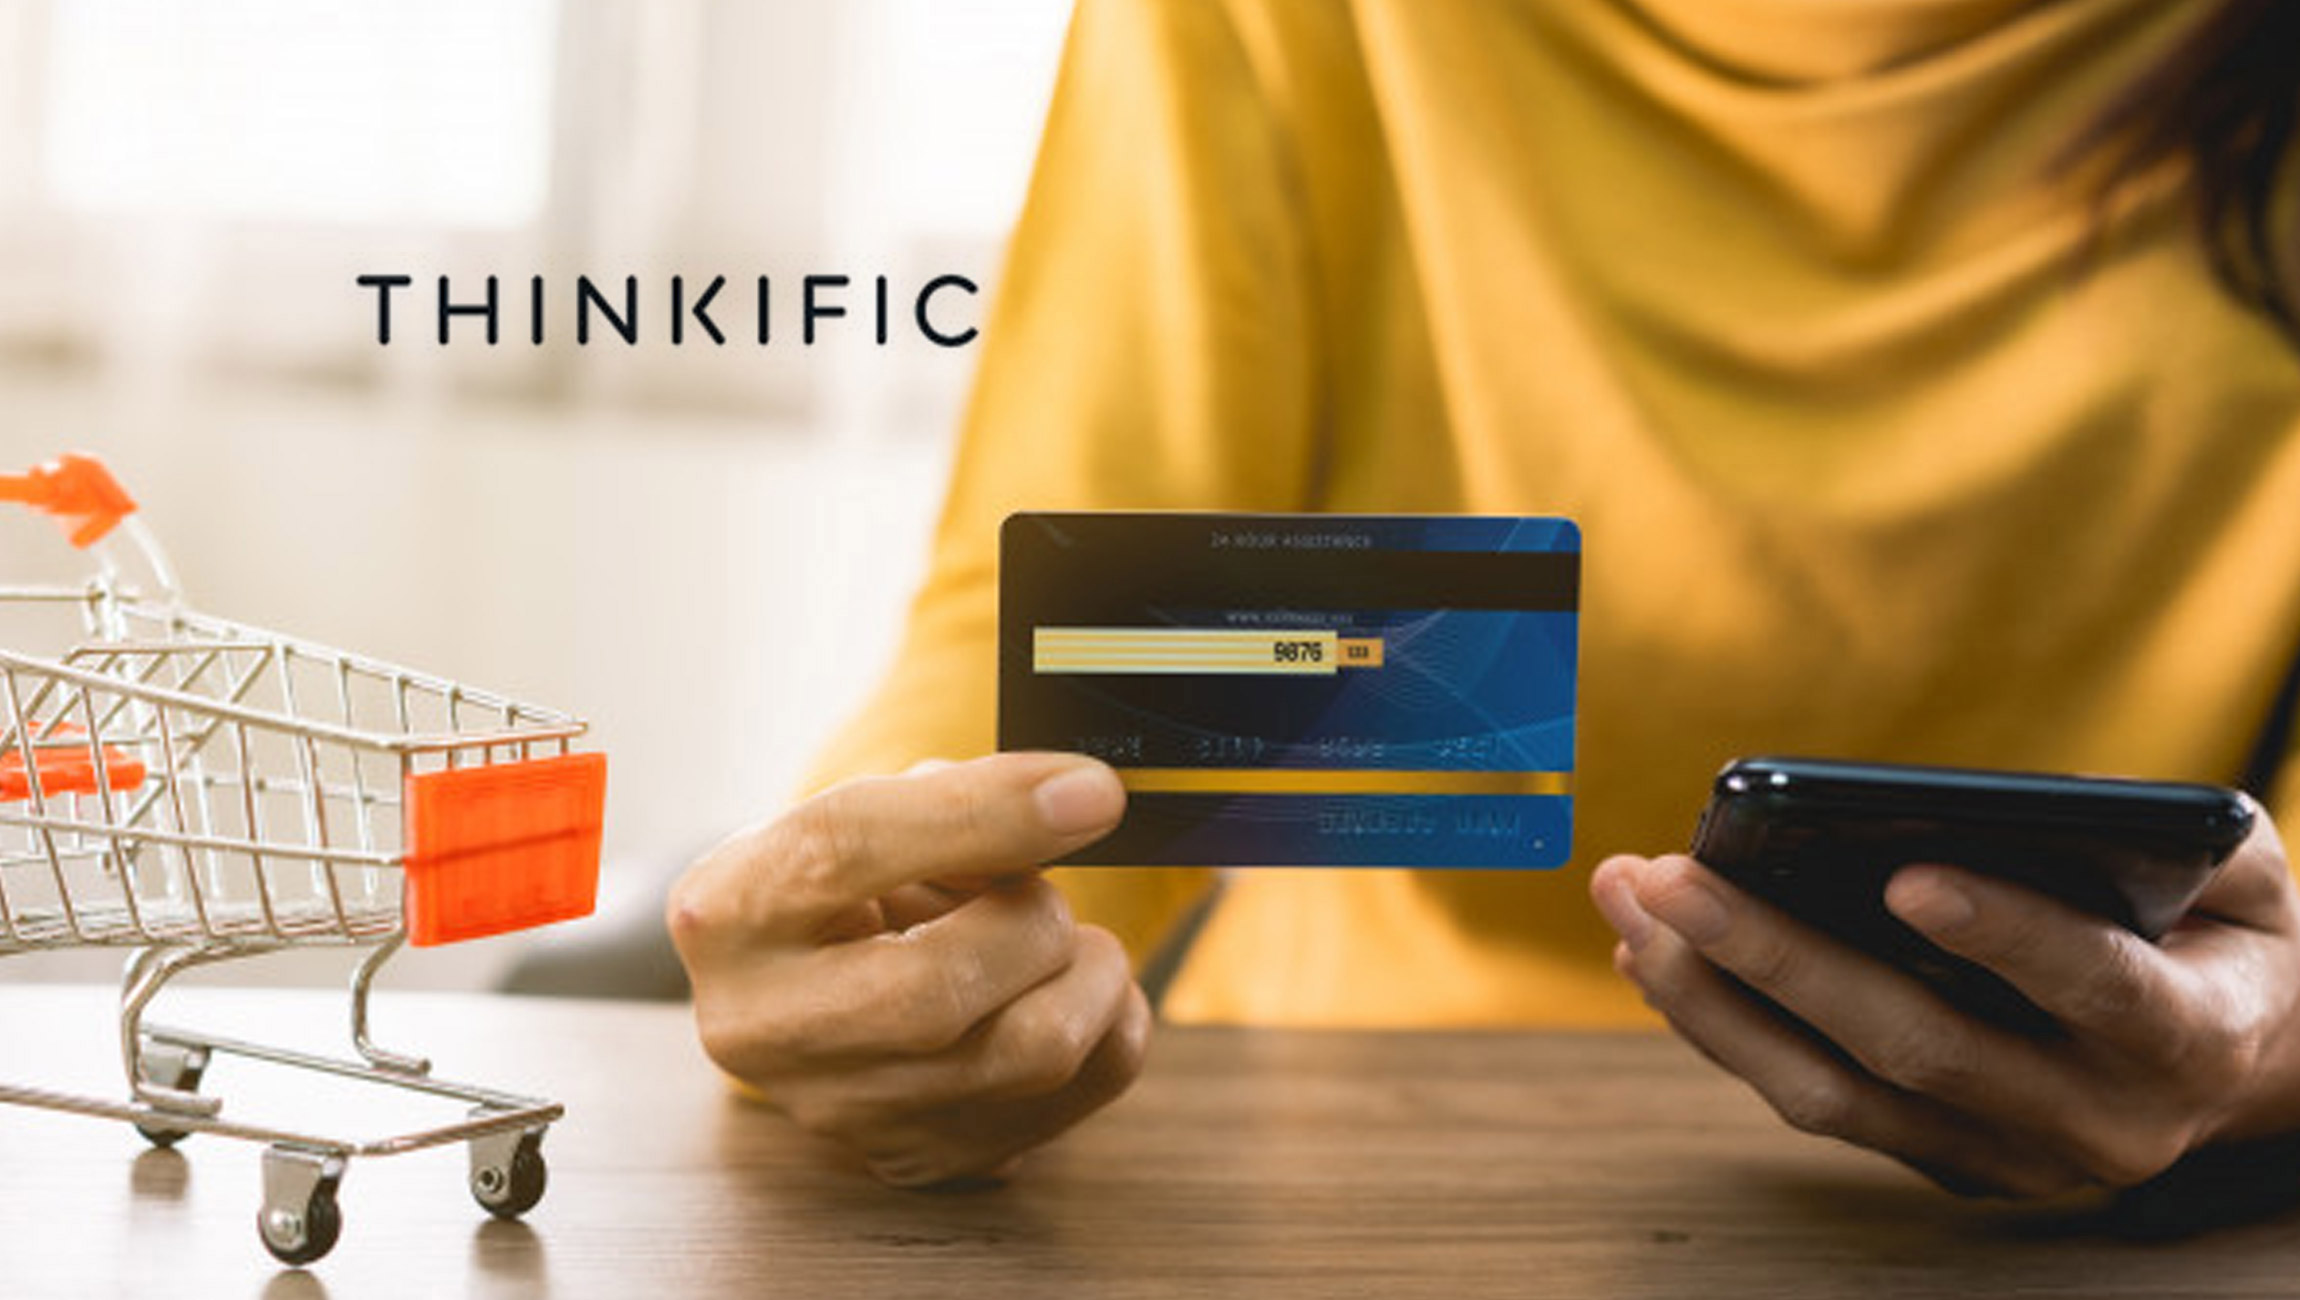 Thinkific Announces Reduction in Workforce, Realizing Efficiencies; Strategy, Growth and Commitment to Creator Success Remain on Track